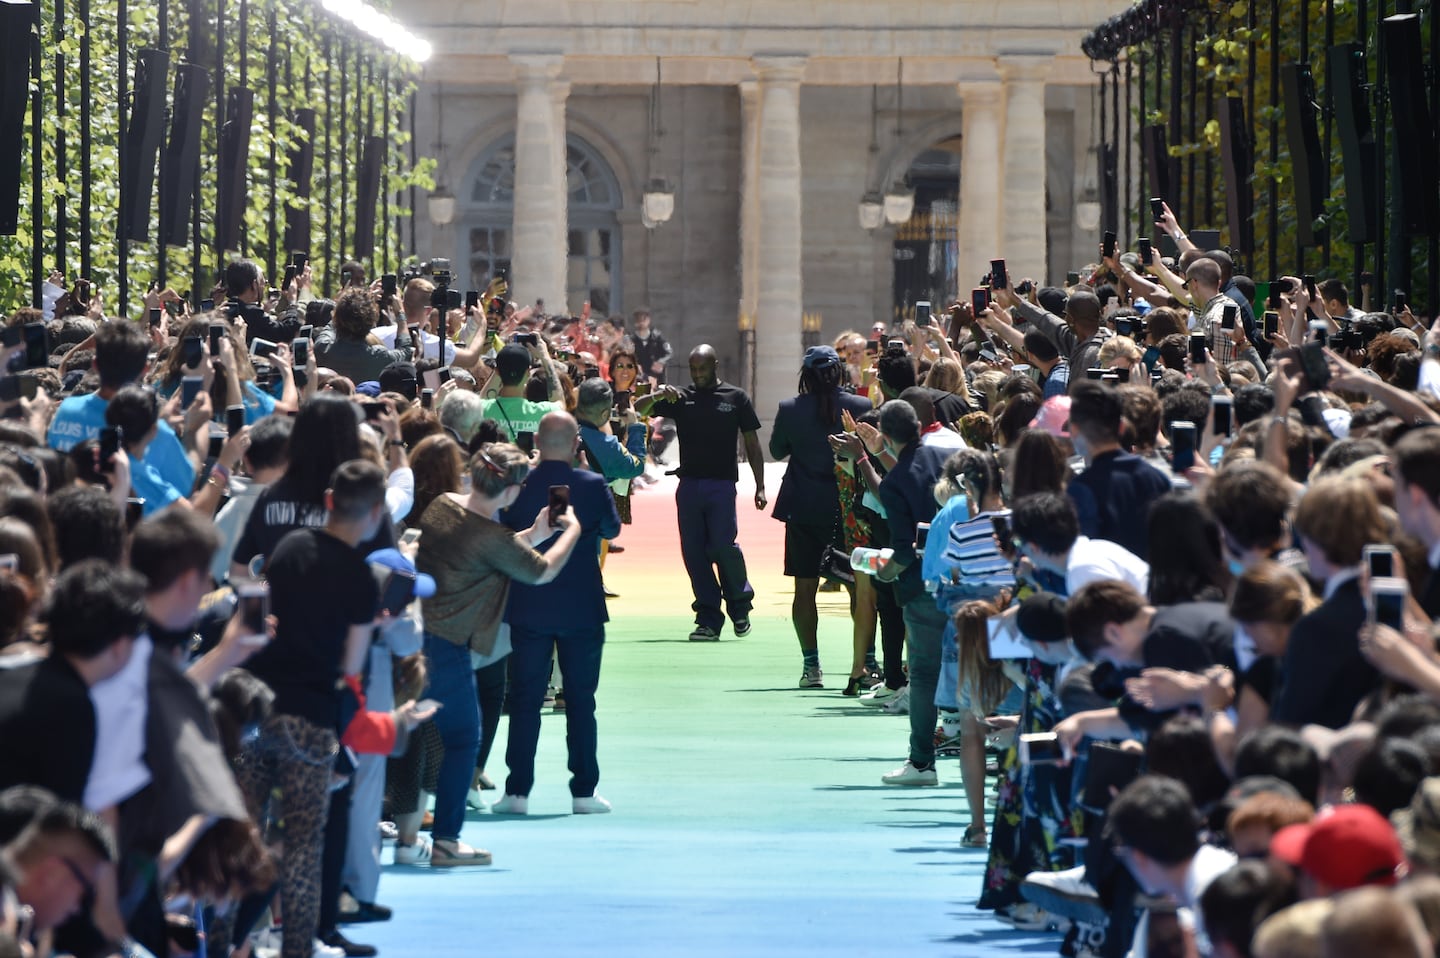 Virgil Abloh takes a bow at his first show for Louis Vuitton in June 2018. Peter White/Getty Images